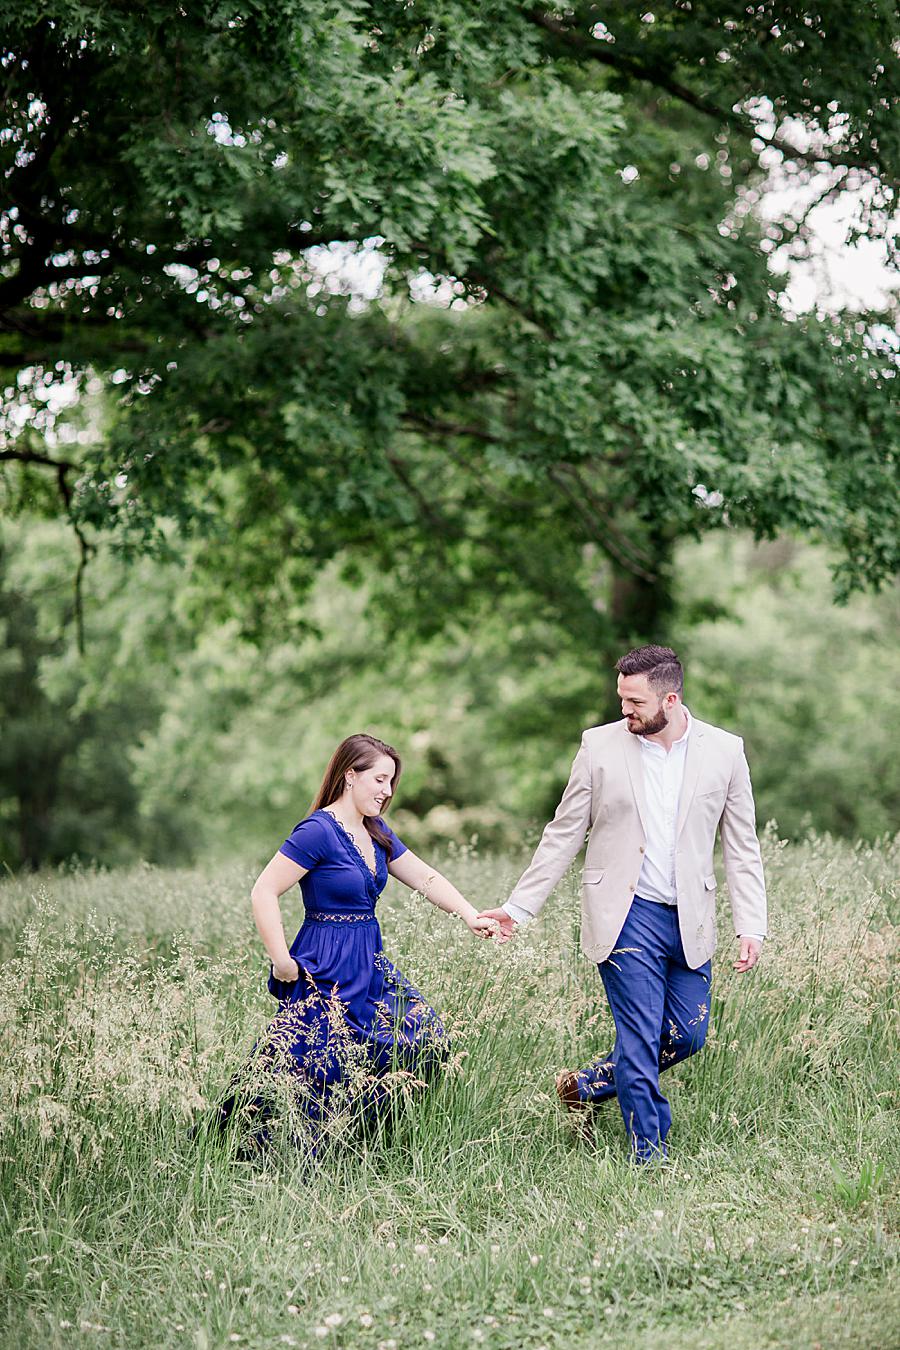 Holding hands by Knoxville Wedding Photographer, Amanda May Photos.